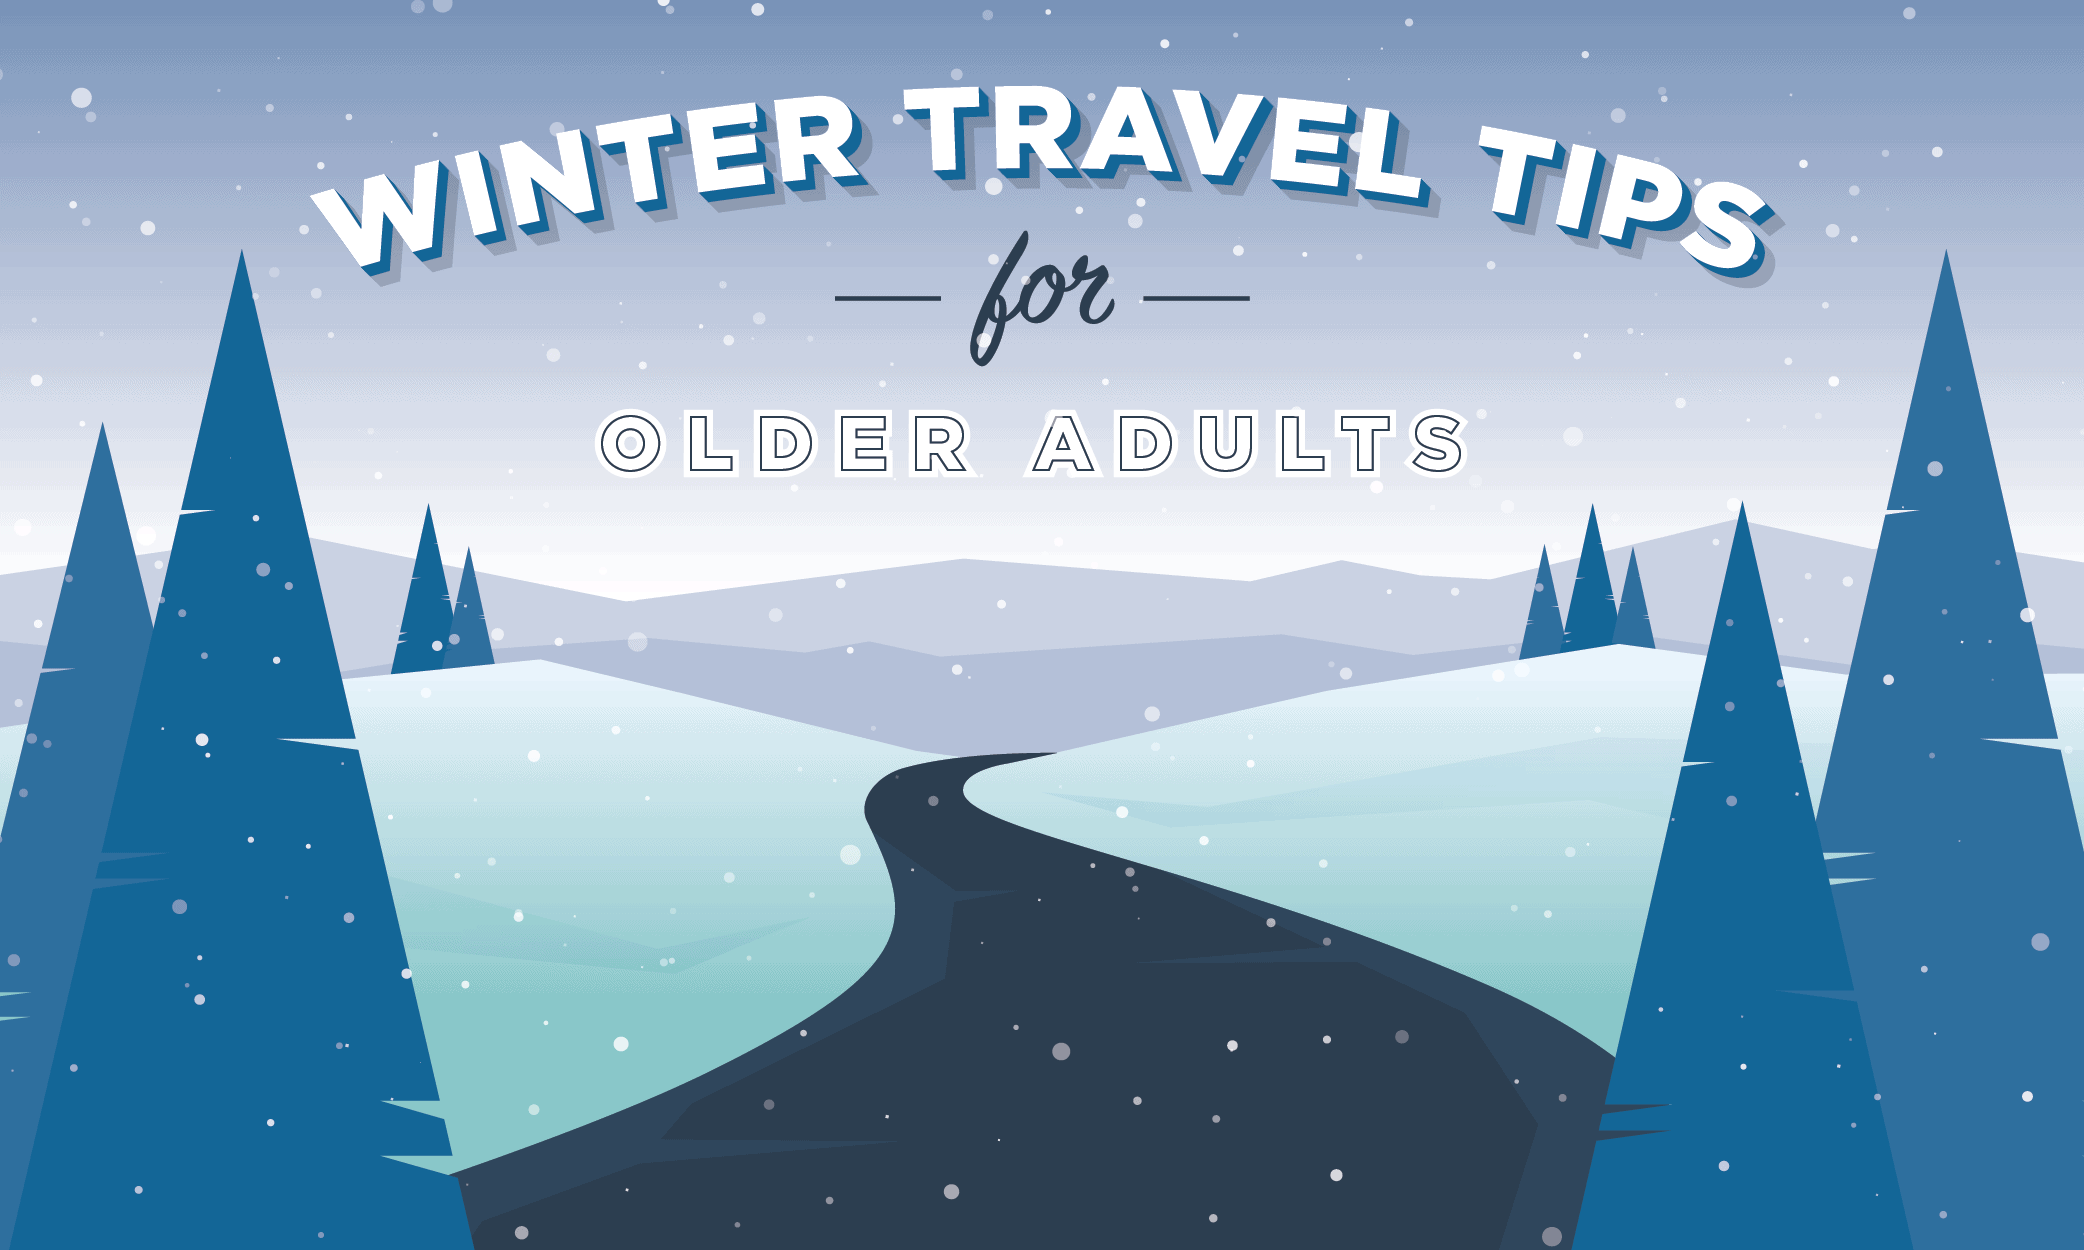 Winter travel tips for older adults